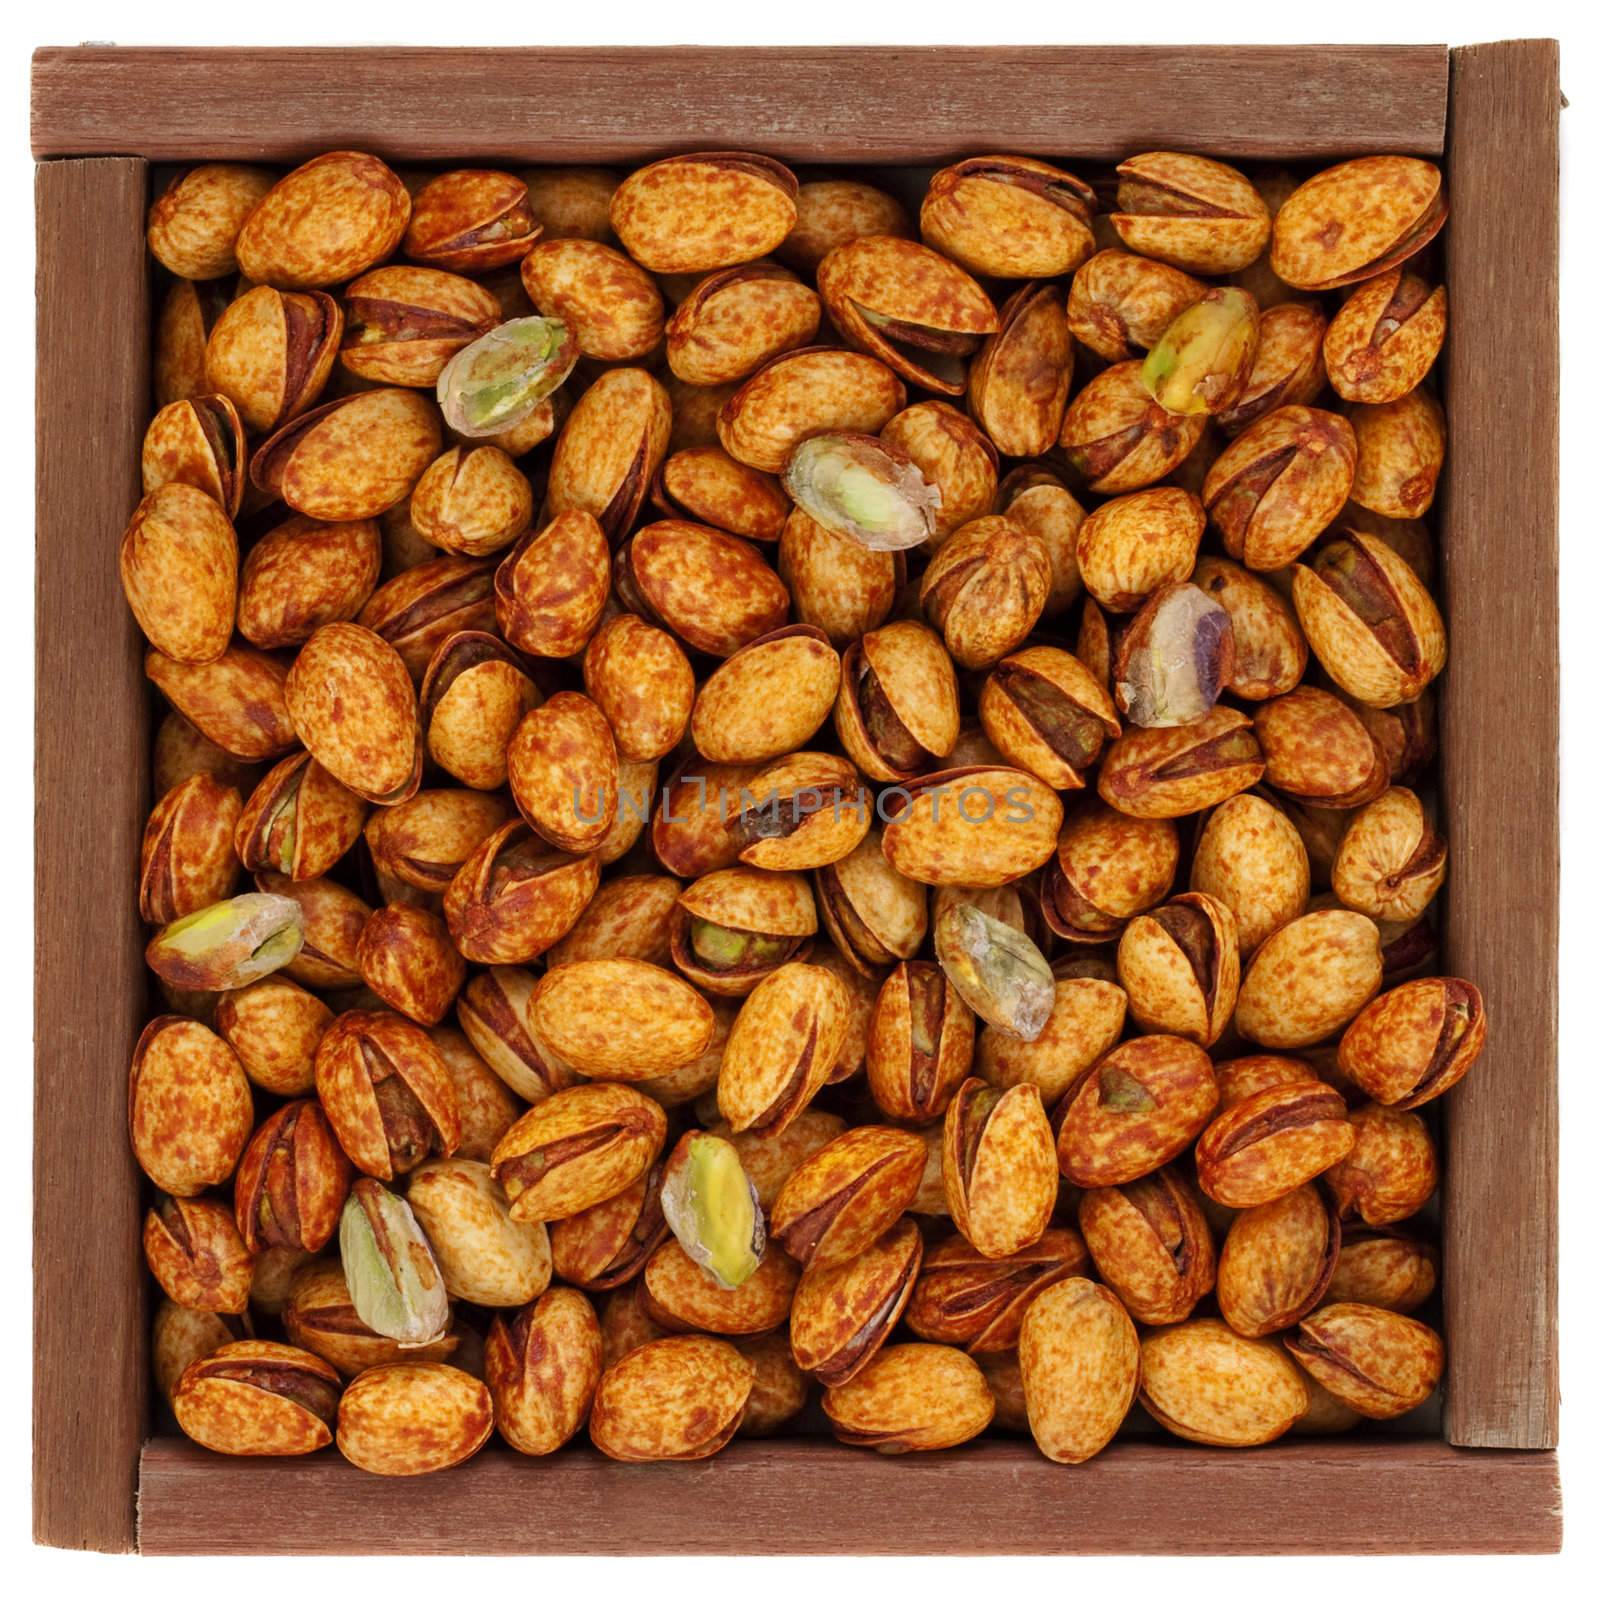 roasted chili lemon pistachio nuts with shells in a rustic, square, wooden box or frame, isolated on white